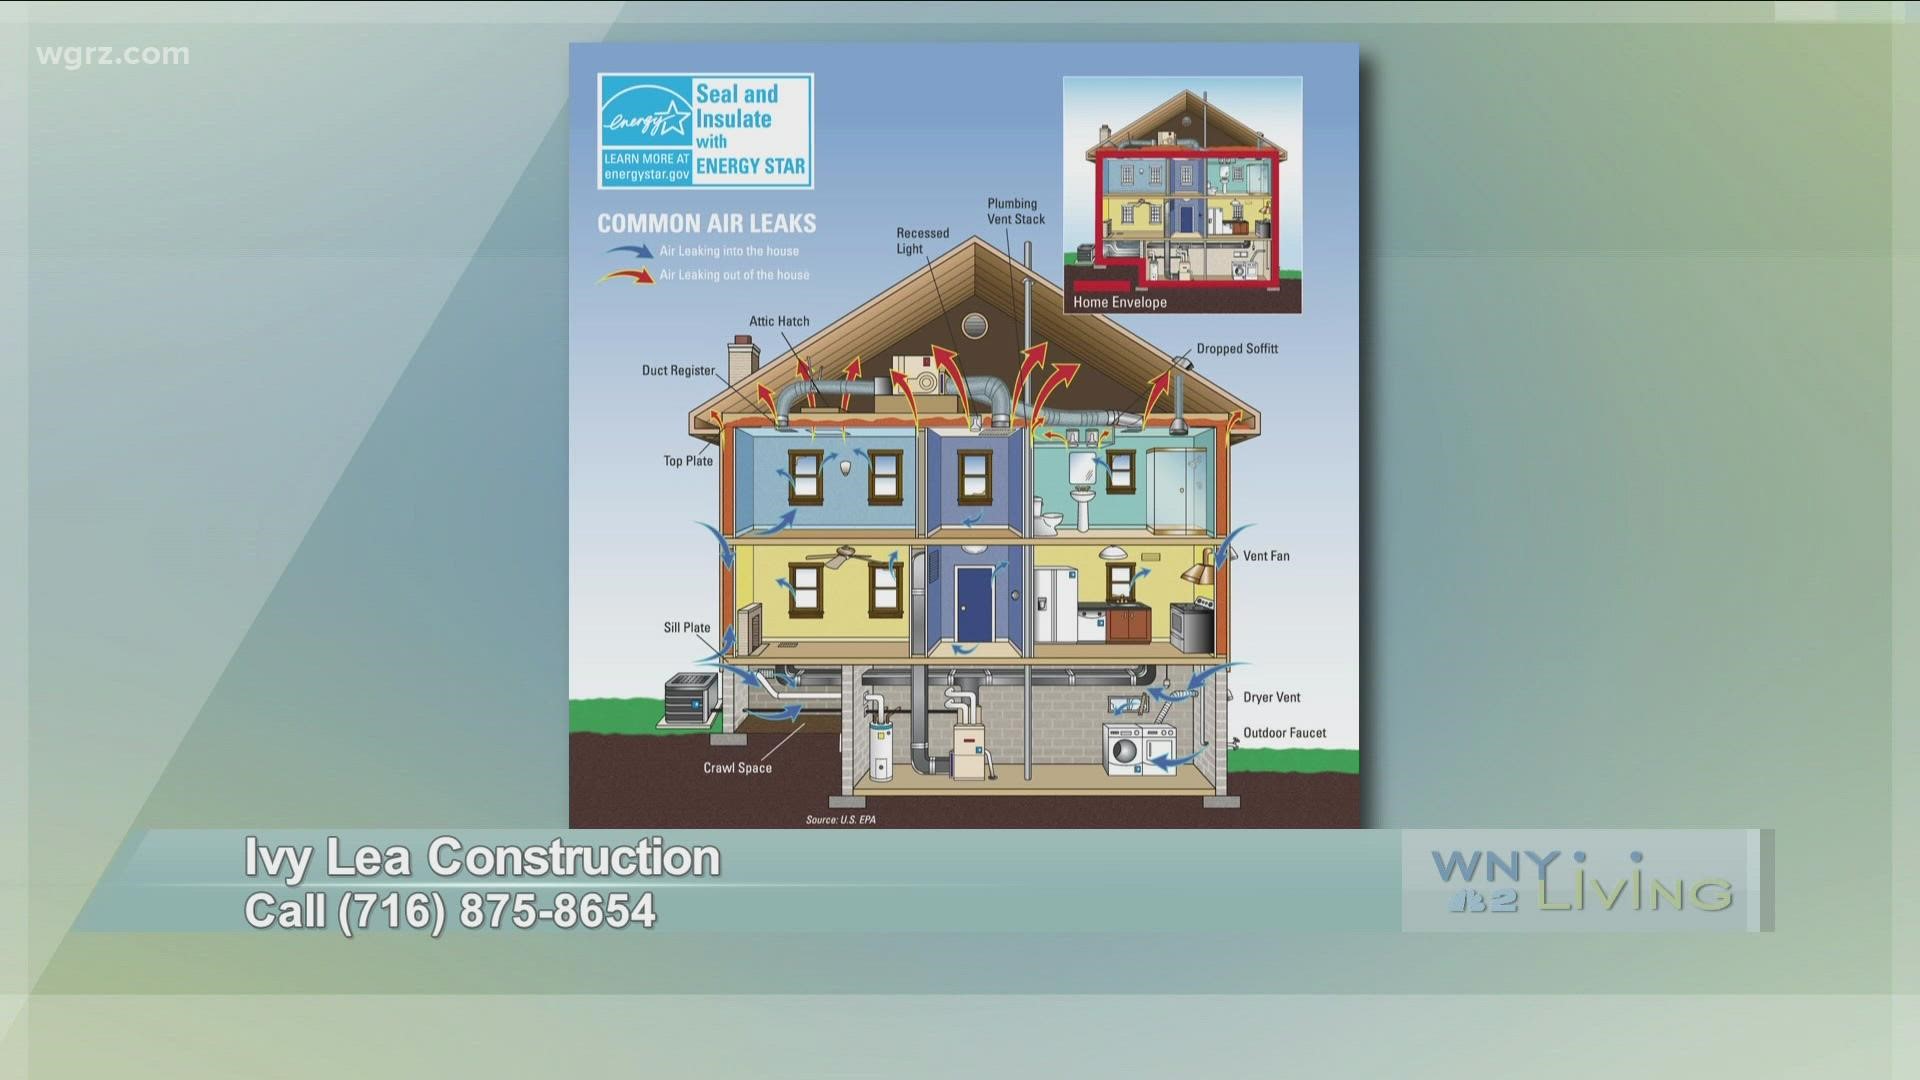 WNY Living - November 6 - Ivy Lea Construction (THIS VIDEO IS SPONSORED BY IVY LEA CONSTRUCTION)